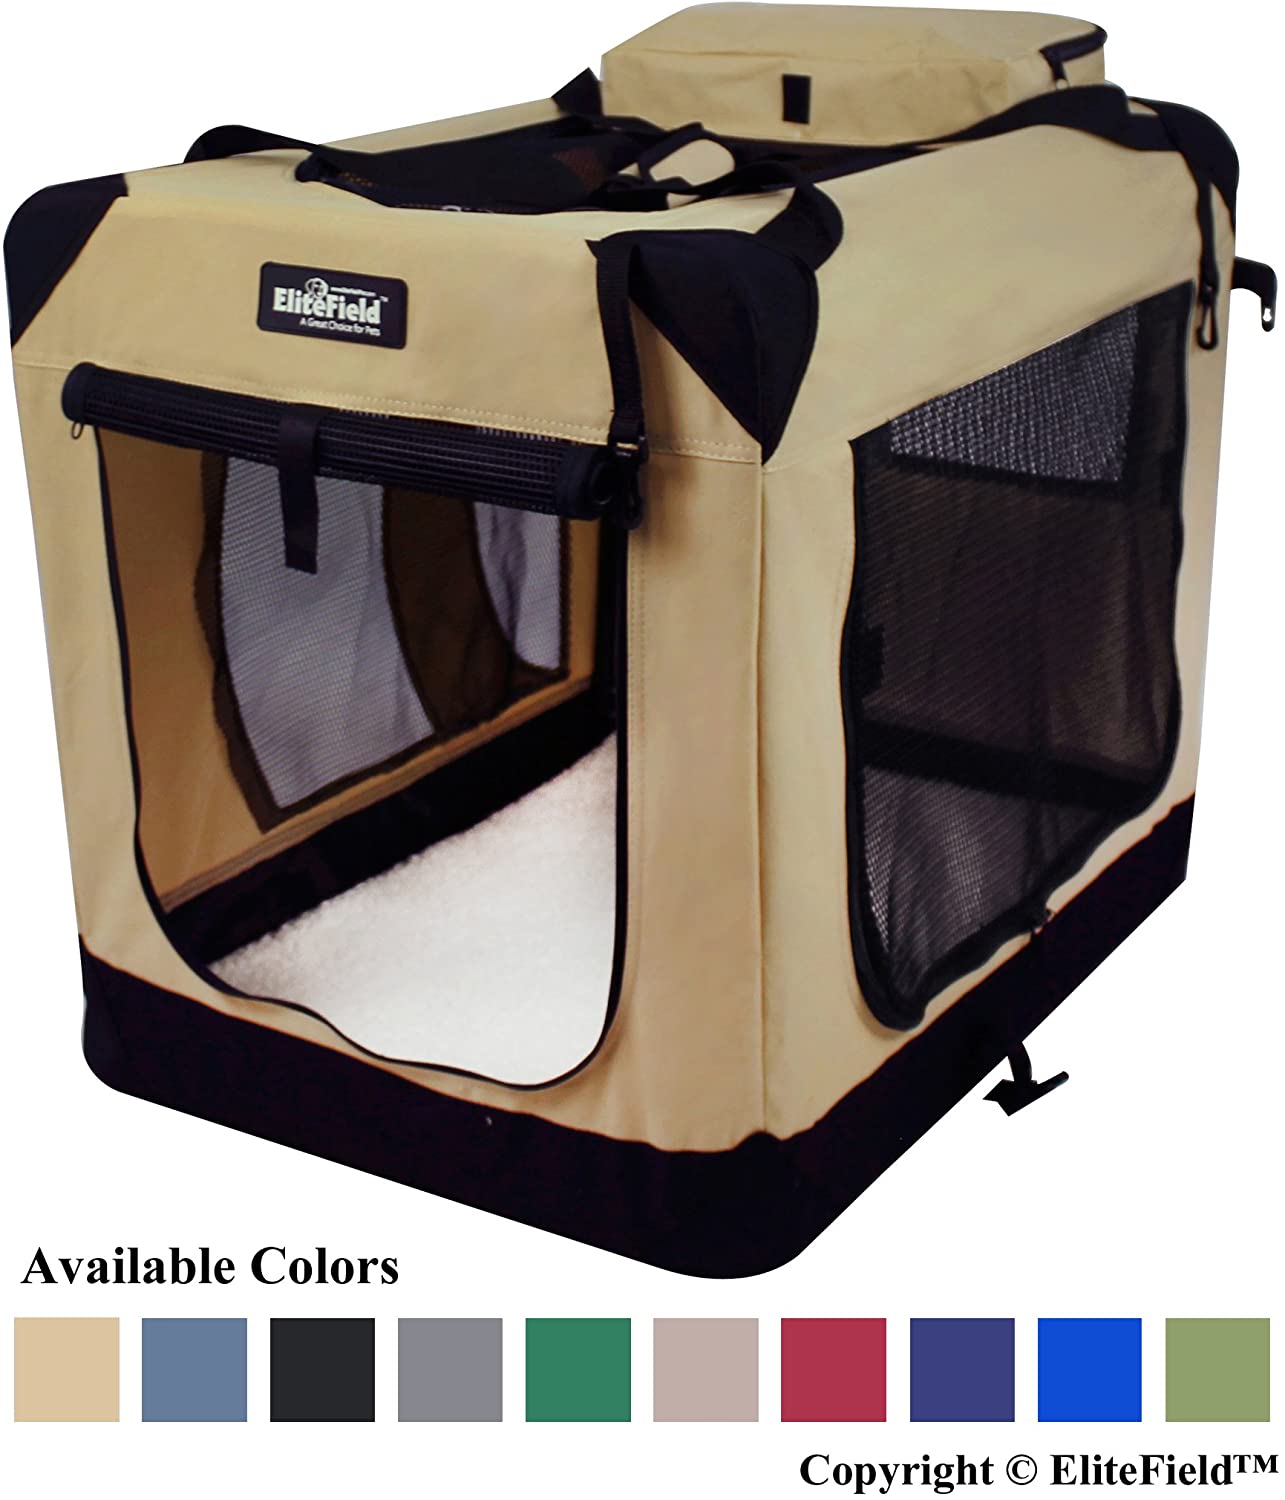 EliteField 3-Door Folding Soft-Sided Pet Crate Carrier